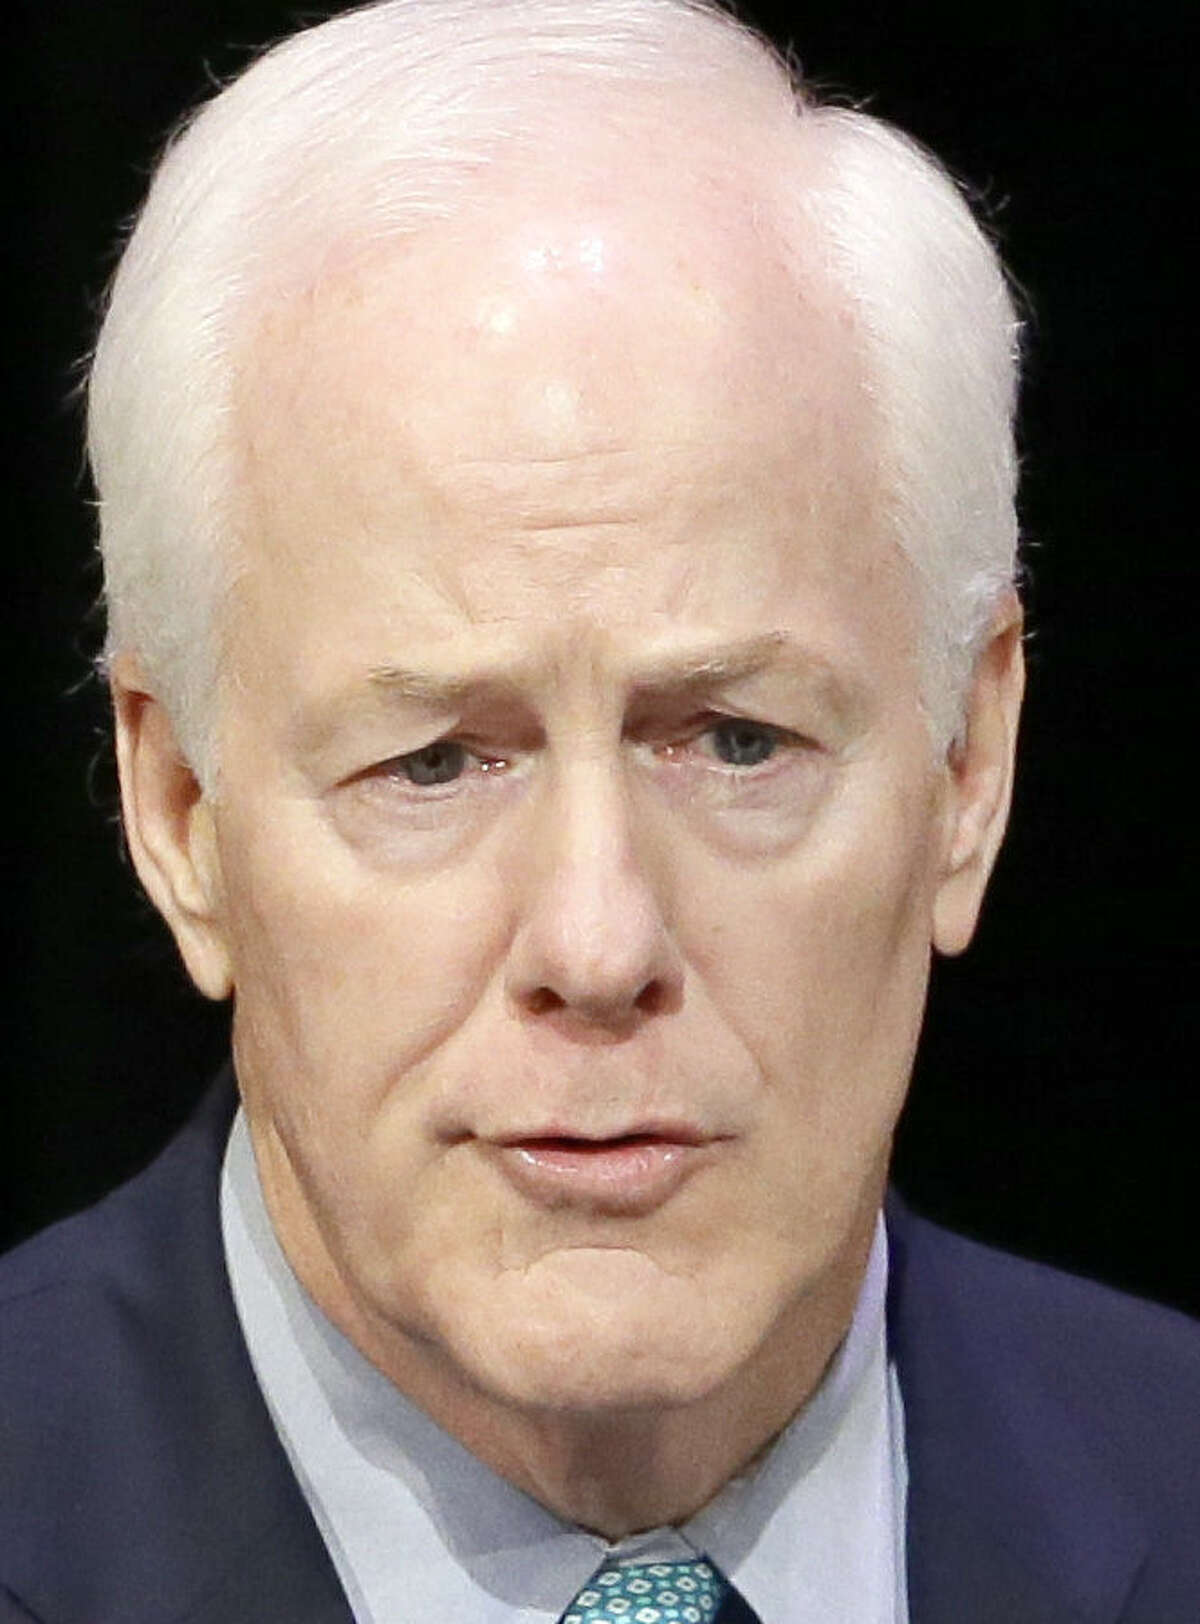 Sen. John Cornyn appears to be headed for victory.